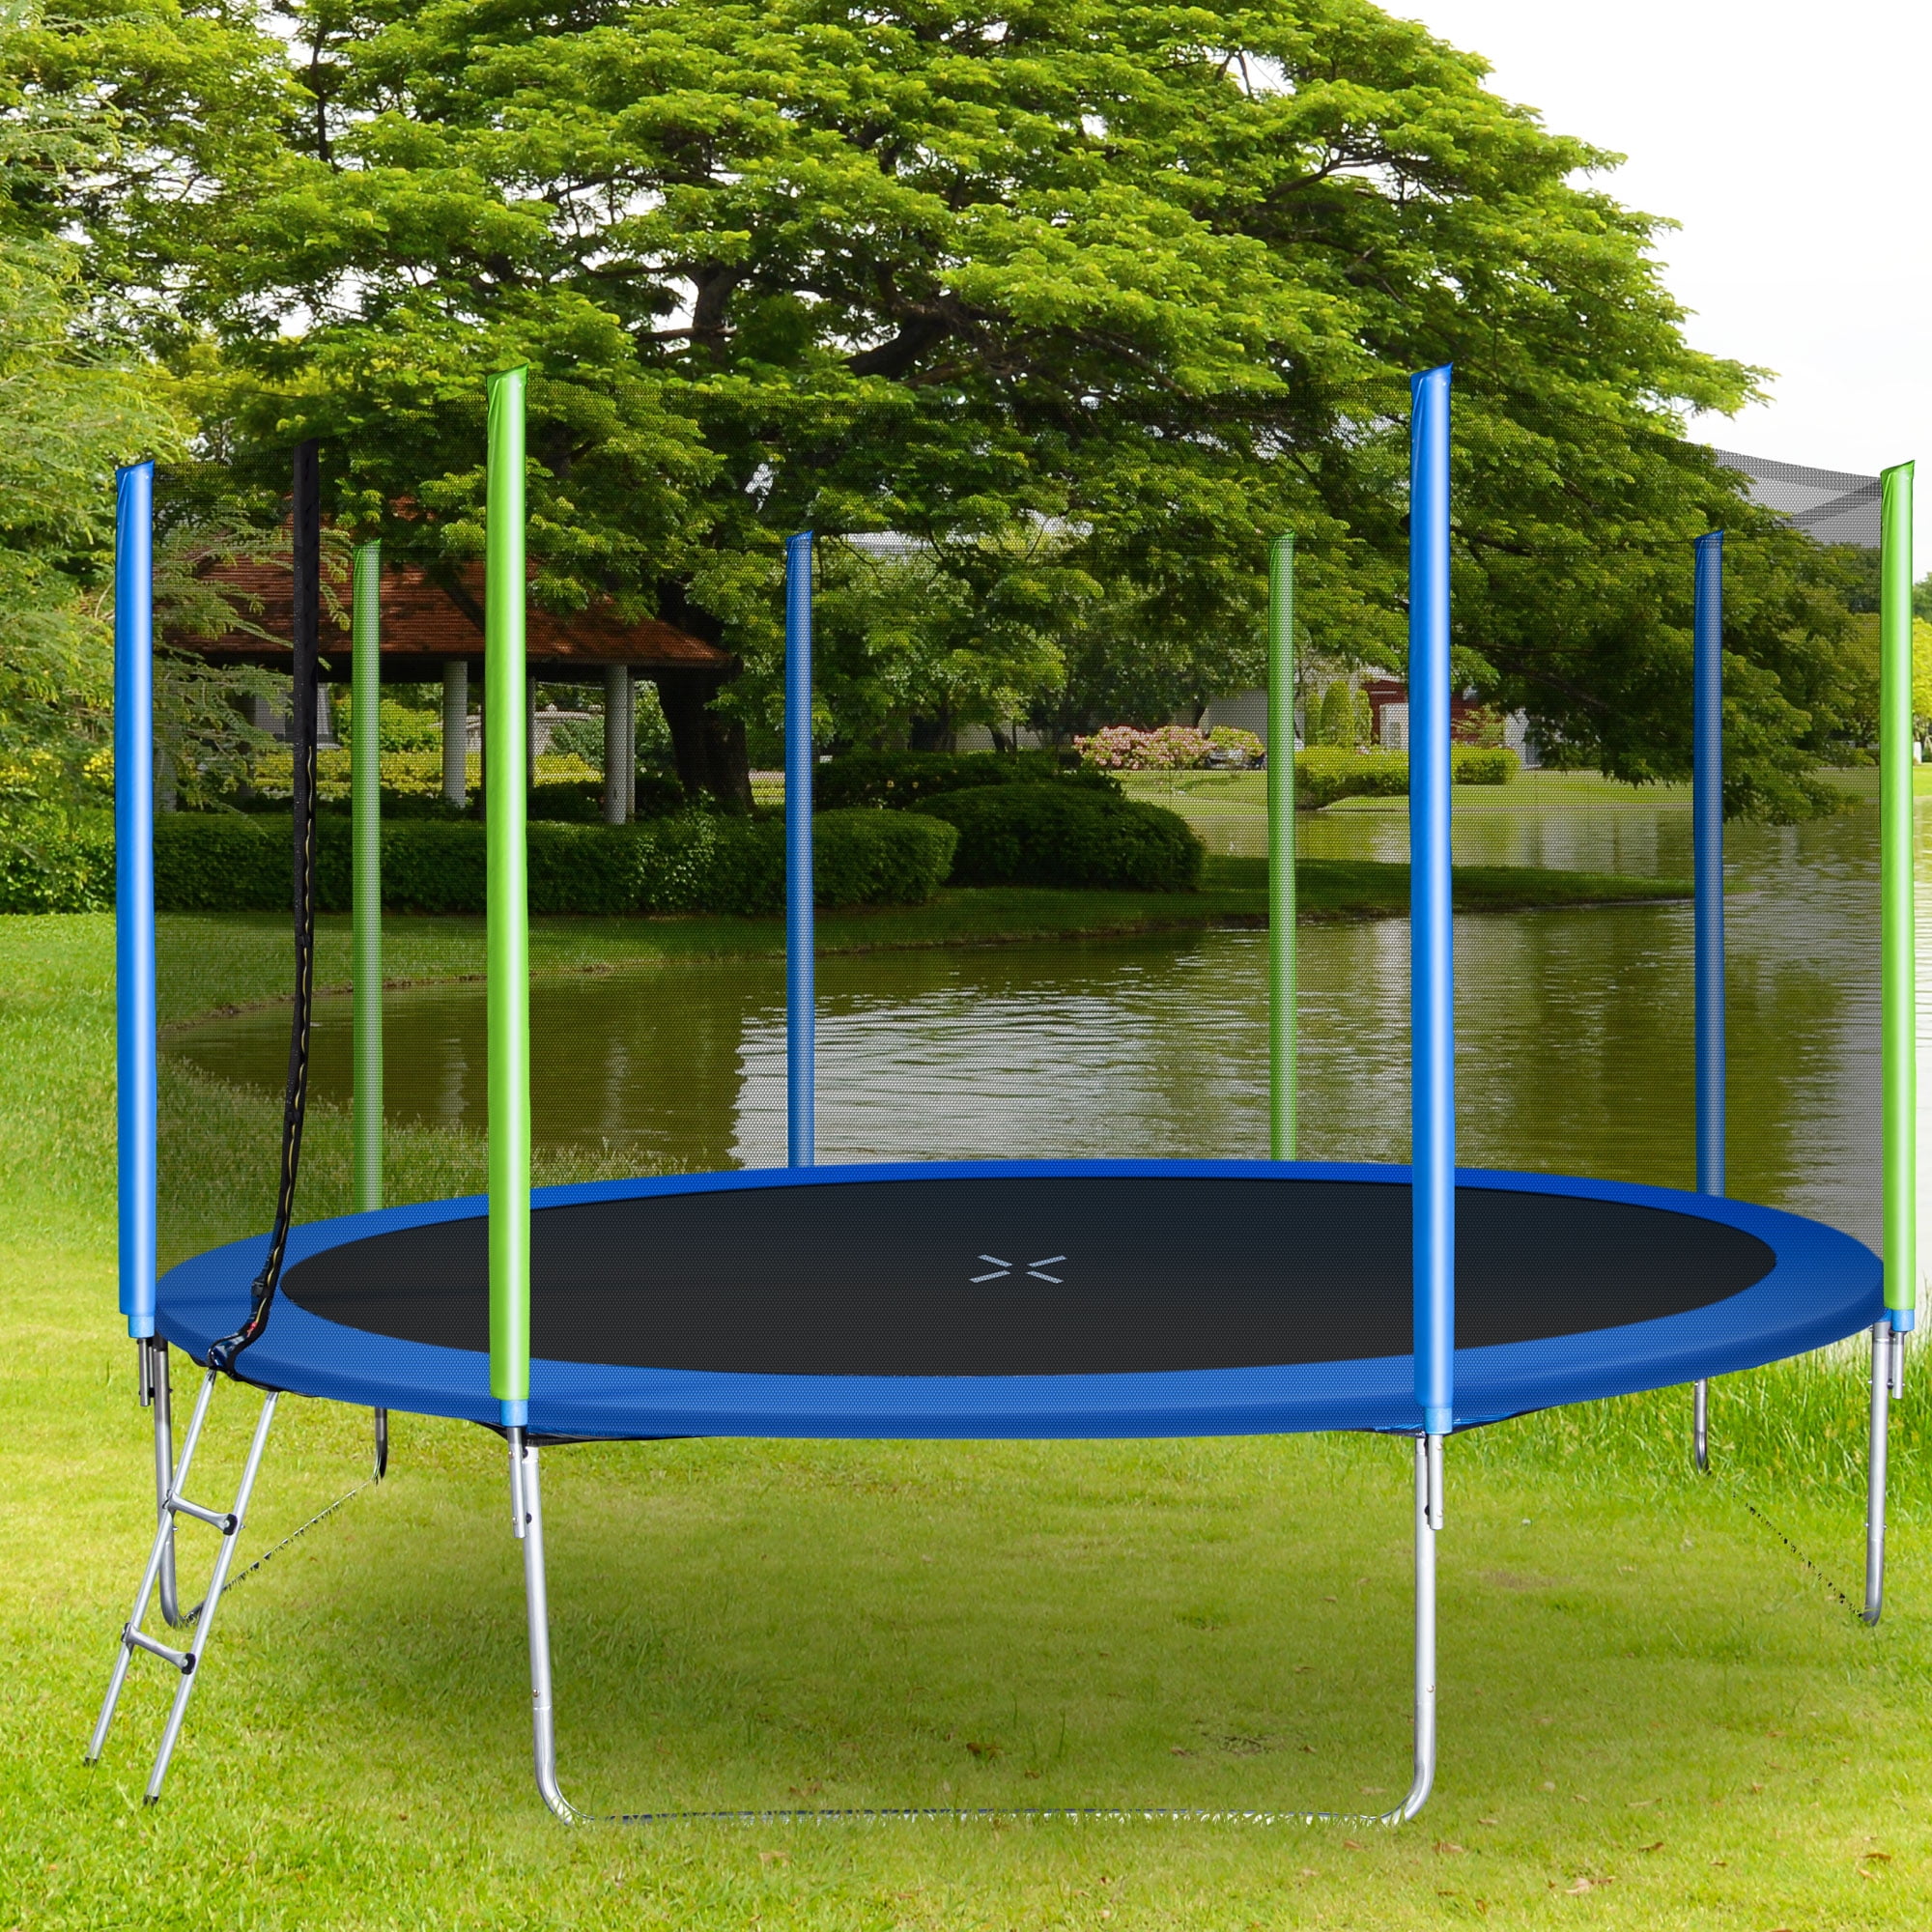 Lejump Skysurf Kids Trampoline 10 /& 12 FT Outdoor Games Recreational Big Trampoline with Enclosure Net /& Ladder Play Yard Outdoor Games for Adults /& Kids Outdoor Toys Birthday Gifts Safe Activity Gym